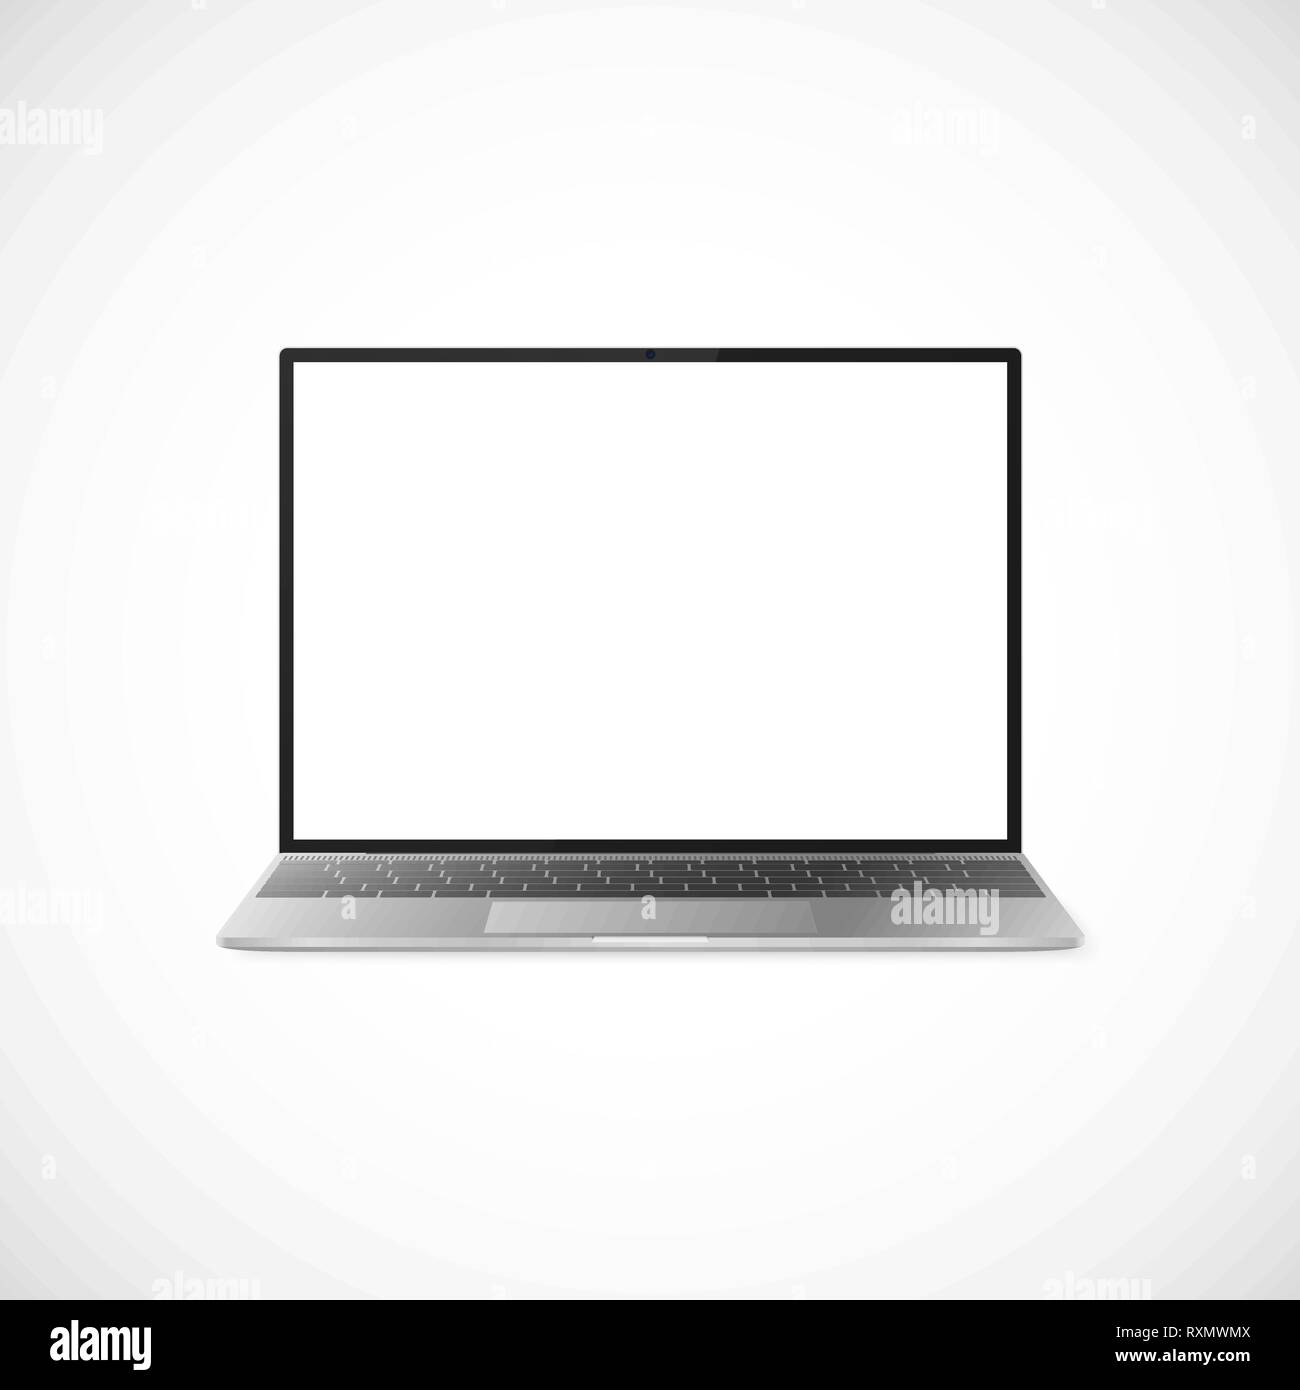 Laptop with shadow isolated on white background. Laptop design with black display and gray keyboard. Laptop front view. Vector illustration Stock Vector